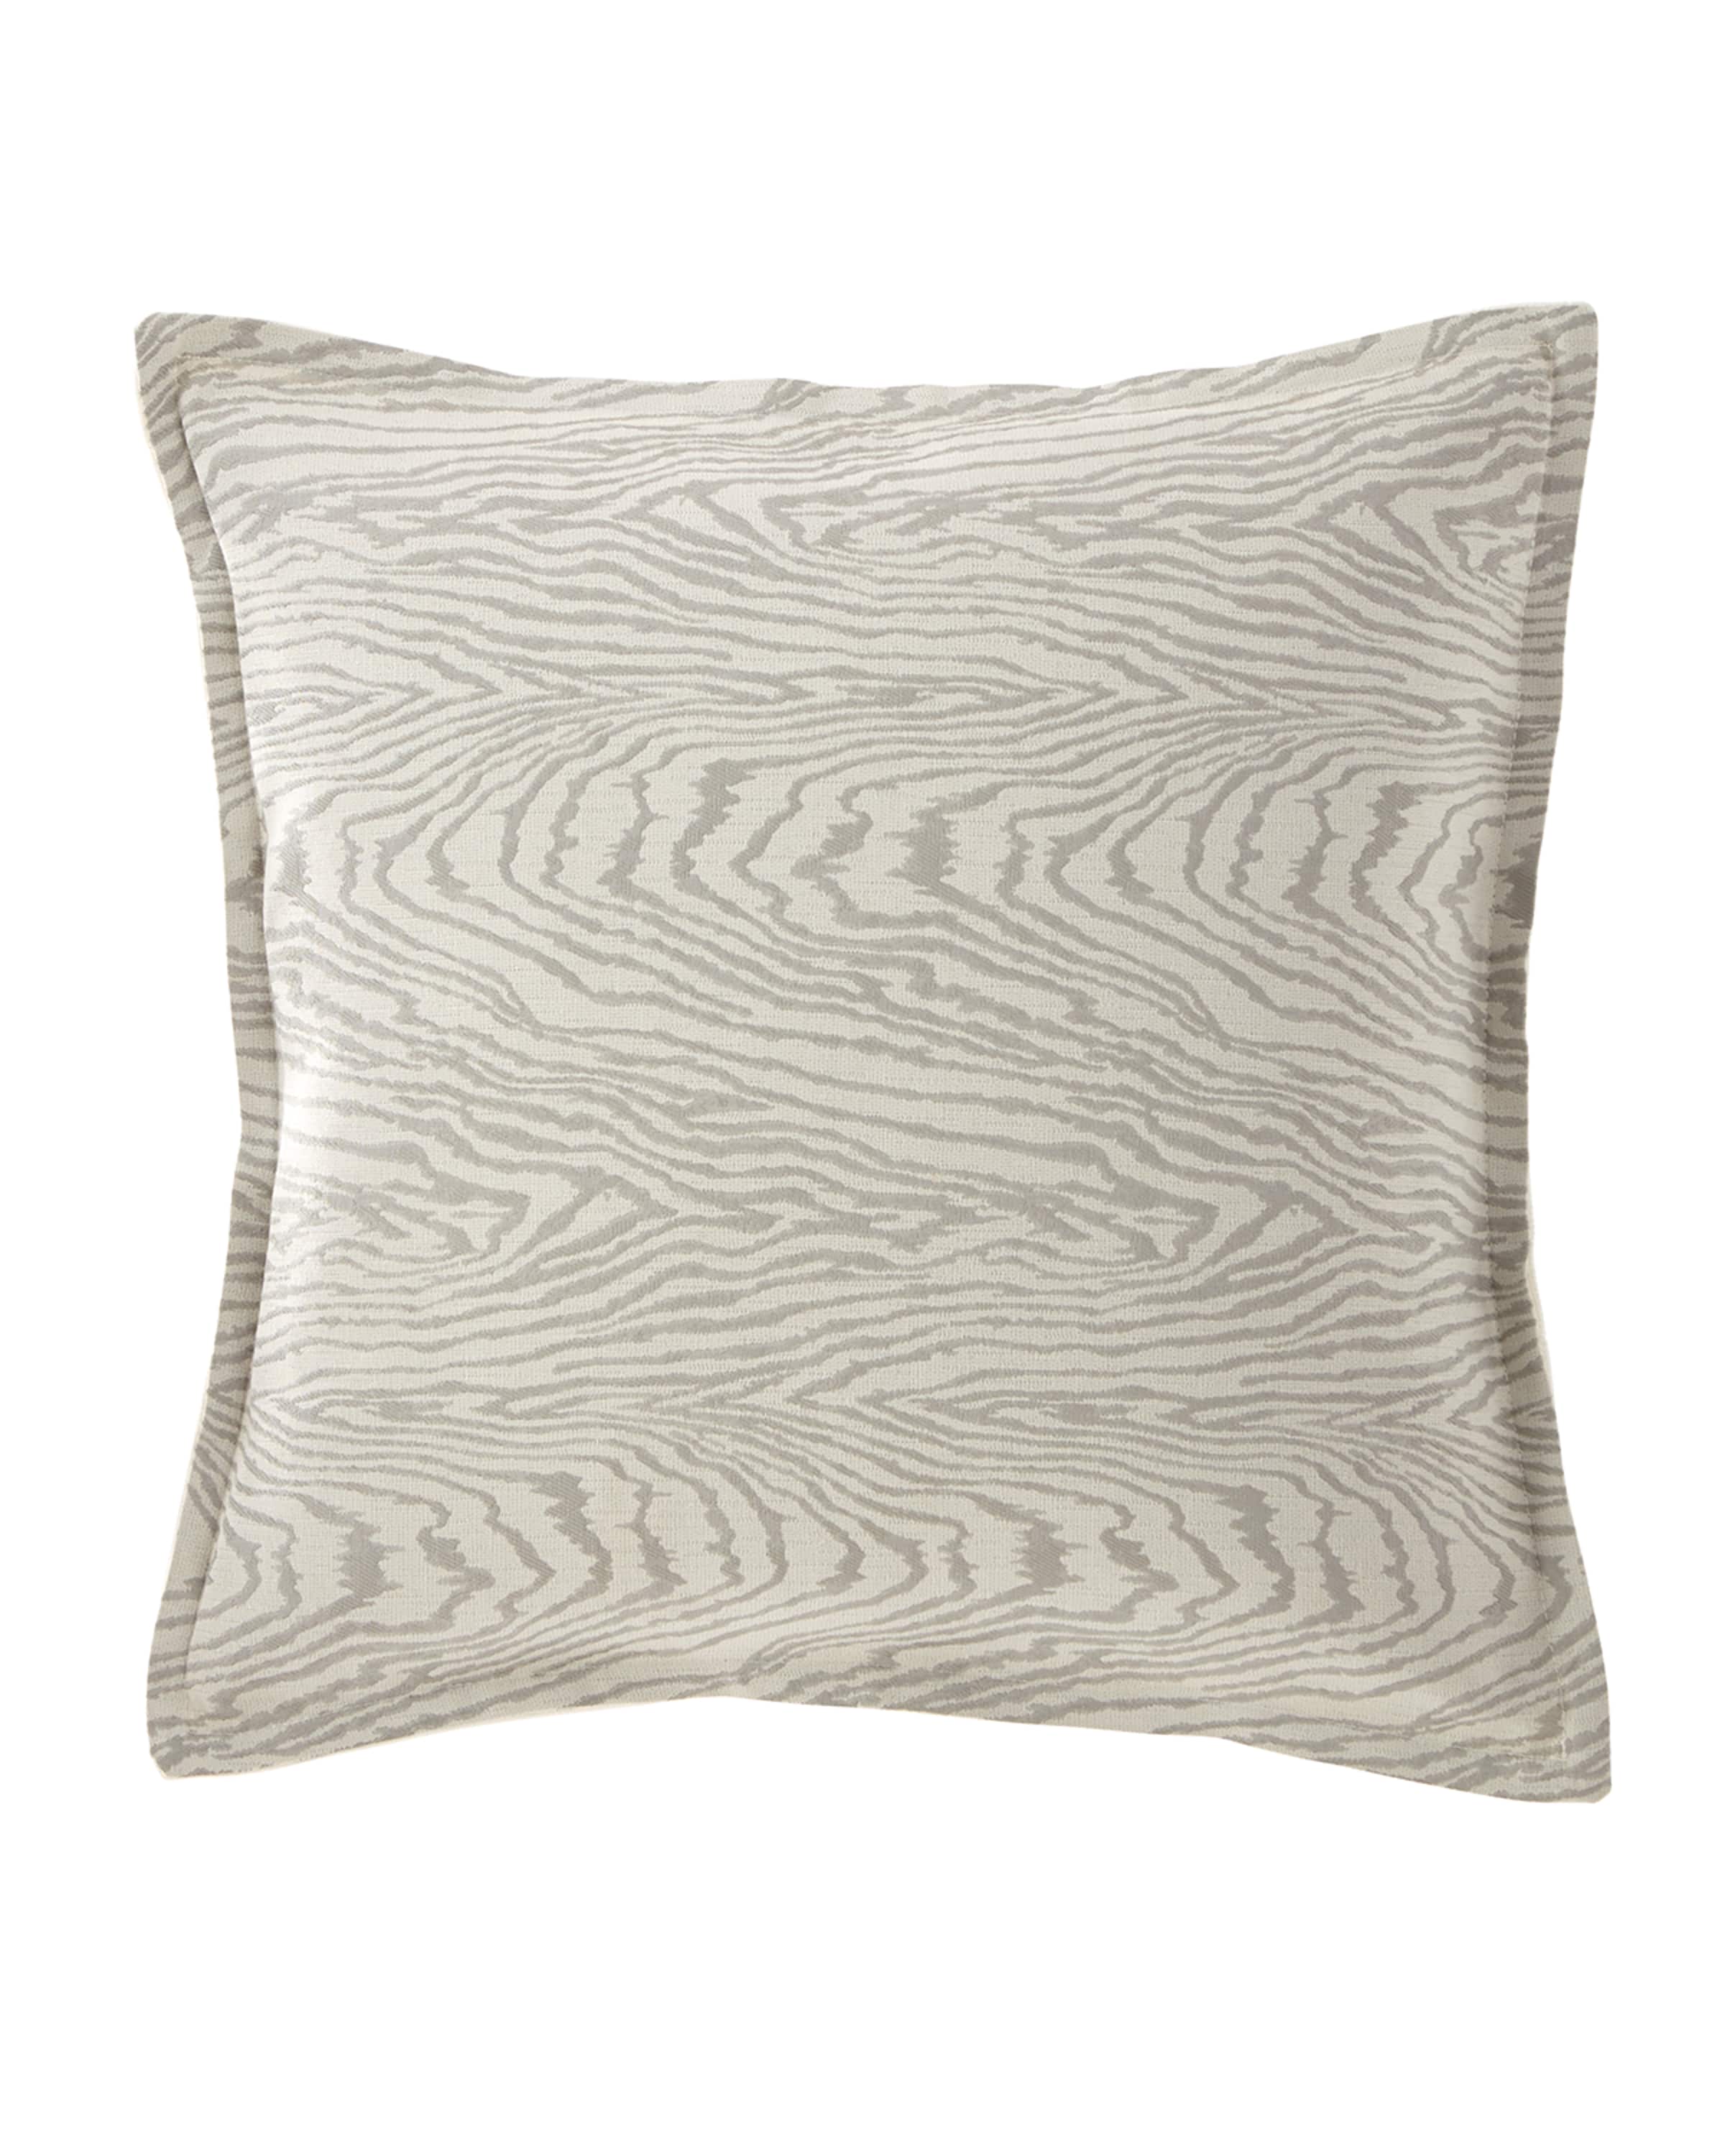 Isabella Collection by Kathy Fielder Lisette Pillow, 15"Sq.